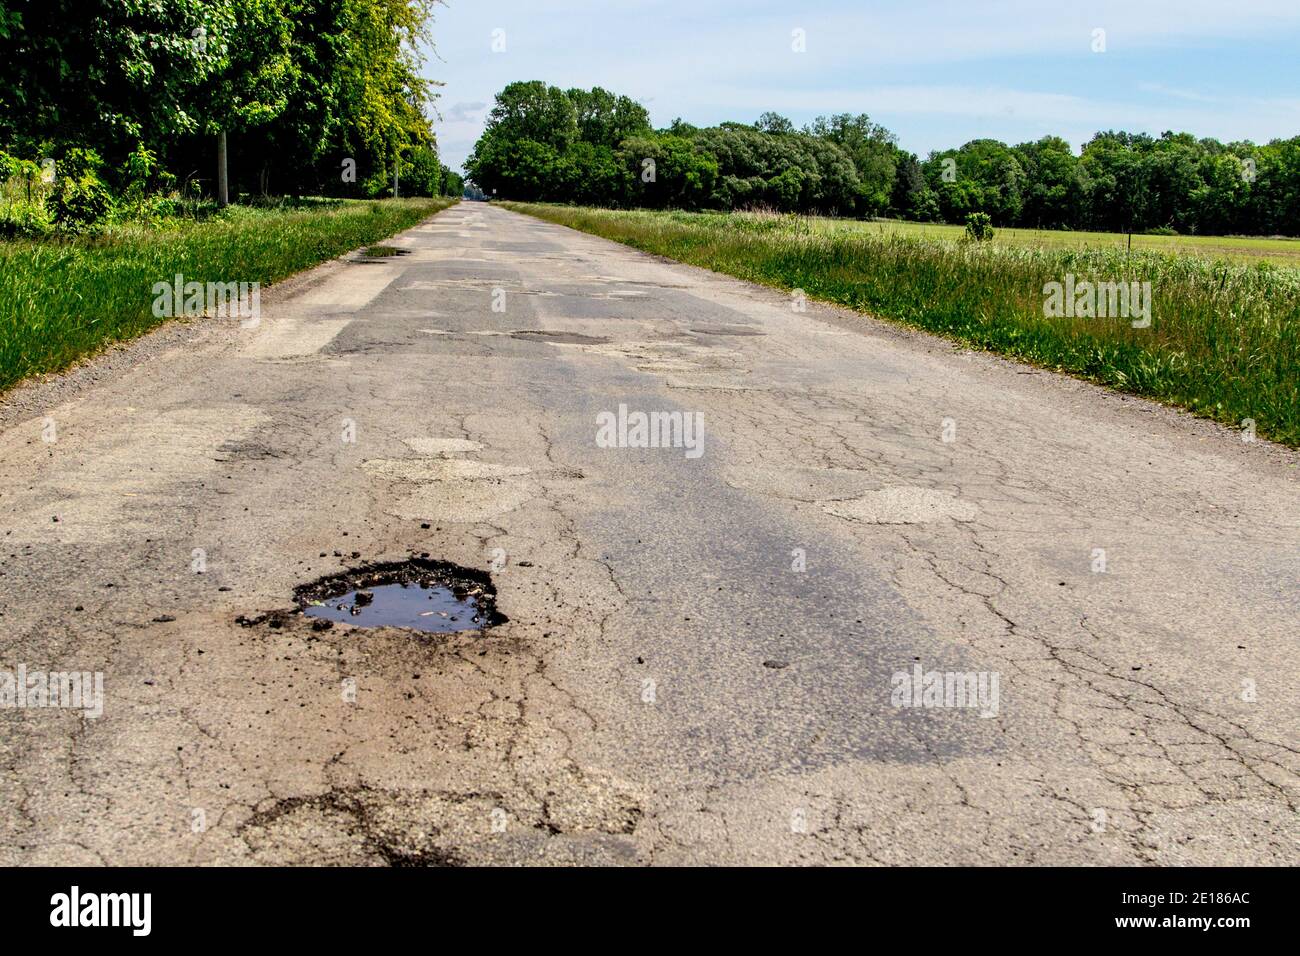 Terrible Michigan Roads. Rural two lane paved road with huge pothole, cracked aging asphalt and no lines painted on the pavement. Stock Photo